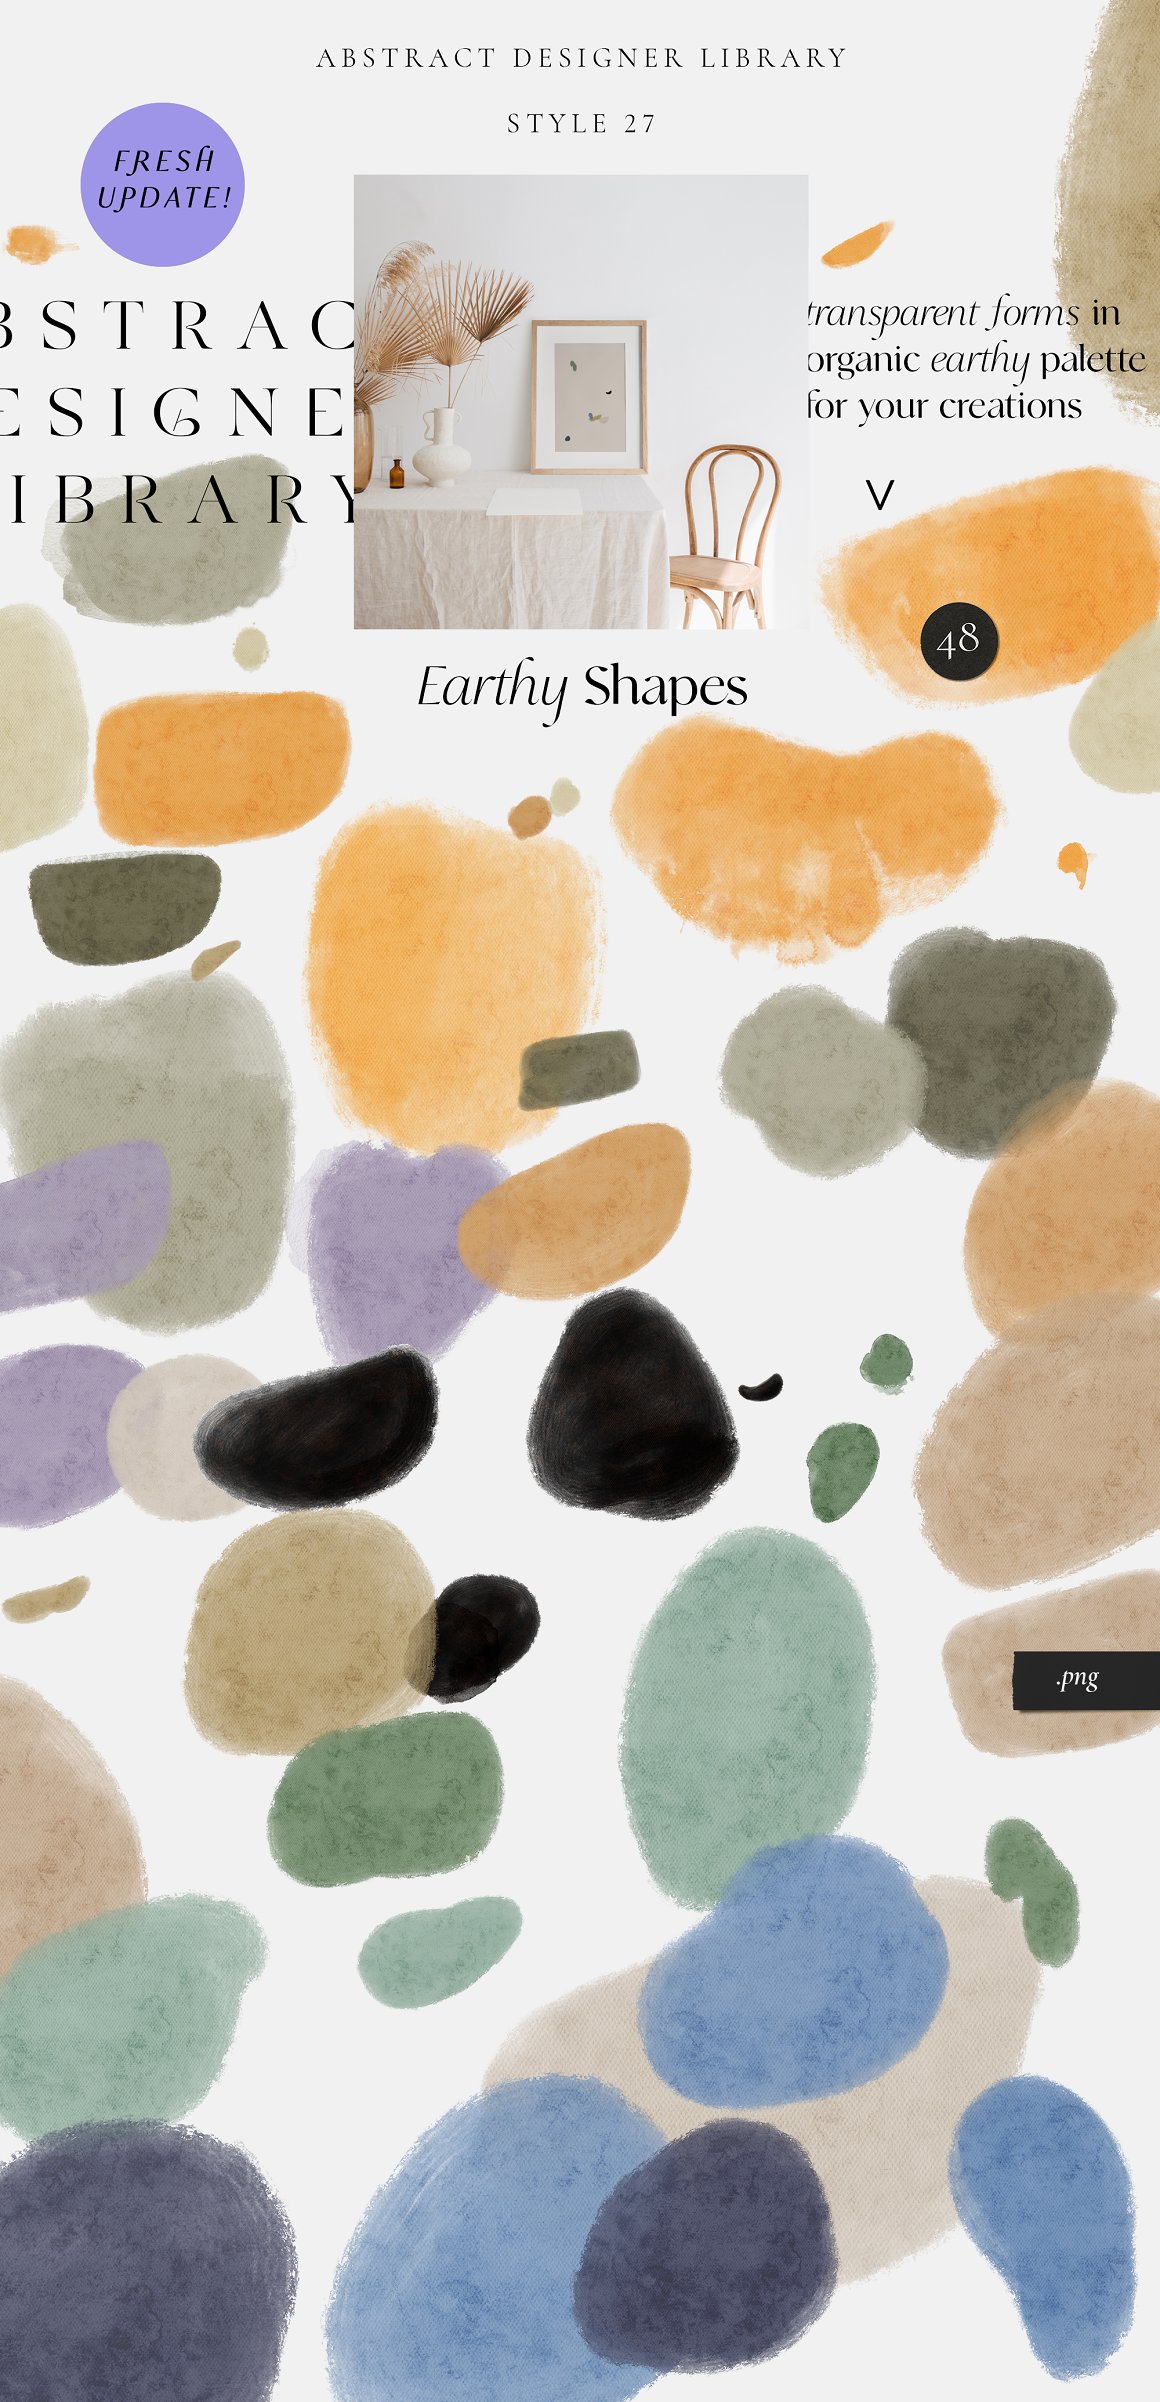 Collection of different earthy shapes on a gray background.